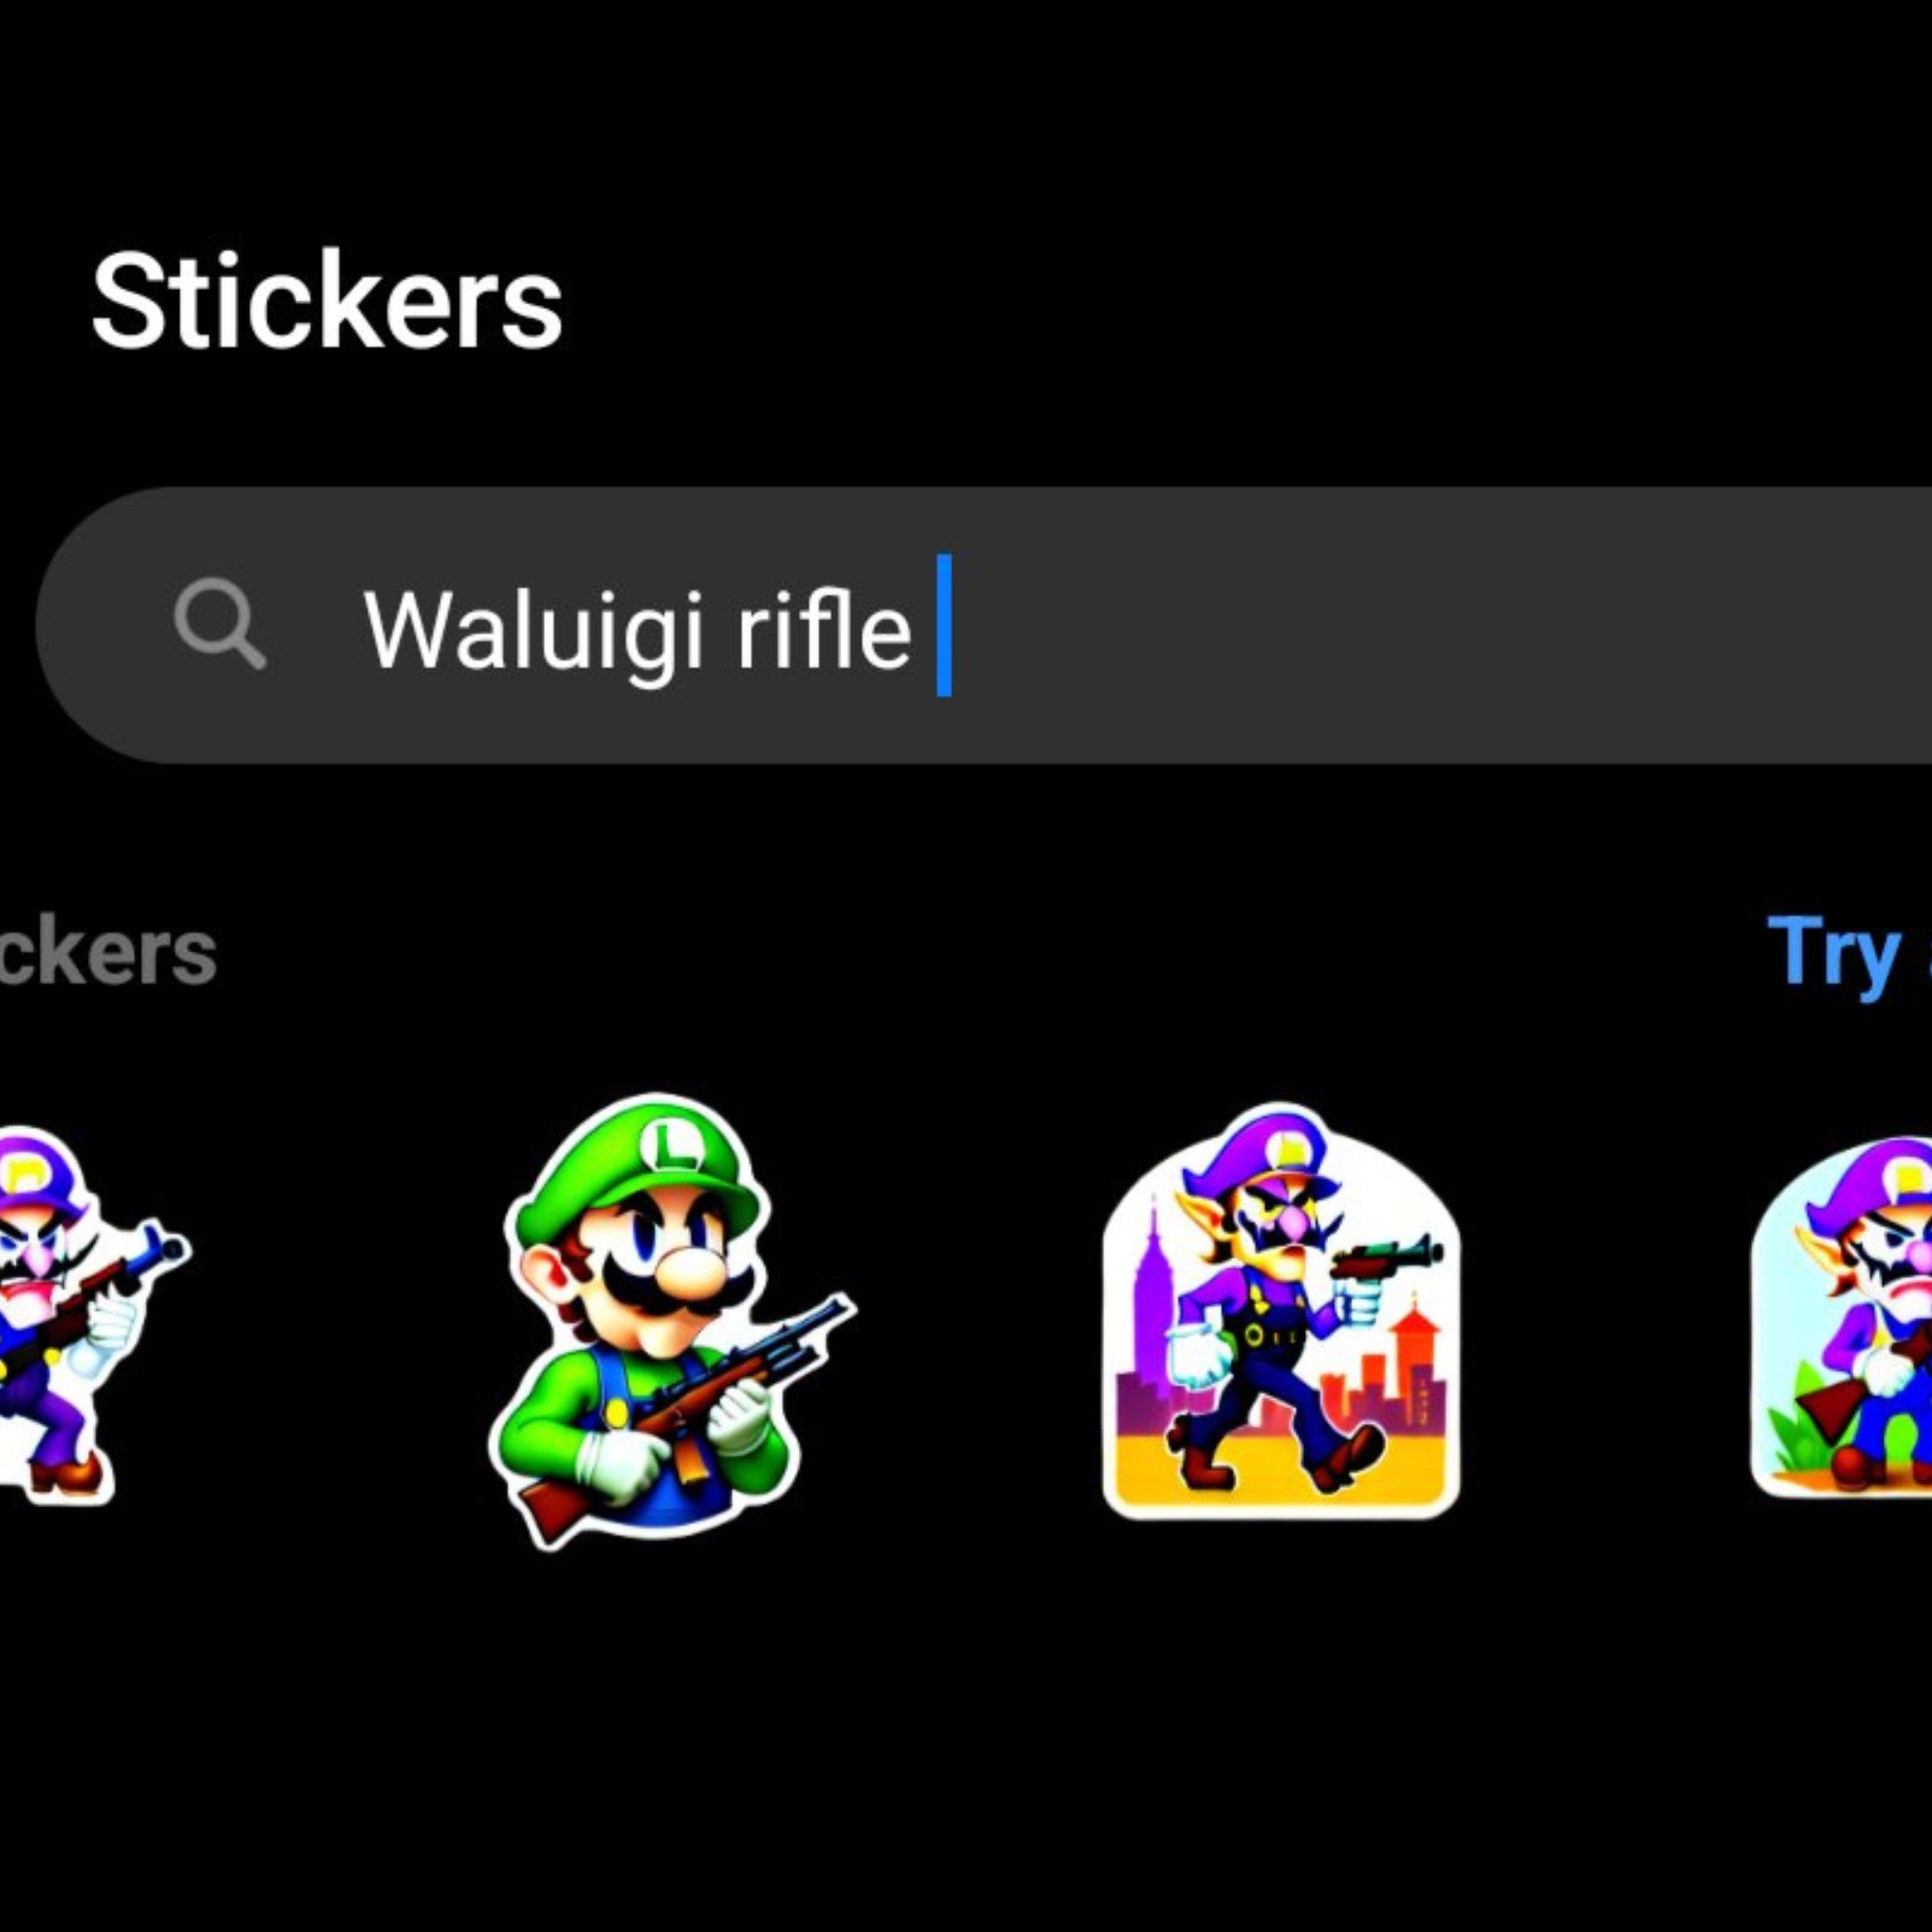 A screenshot taken from Facebook Messenger’s AI-generated sticker tool, depicting illustrations of Waluigi with a rifle.